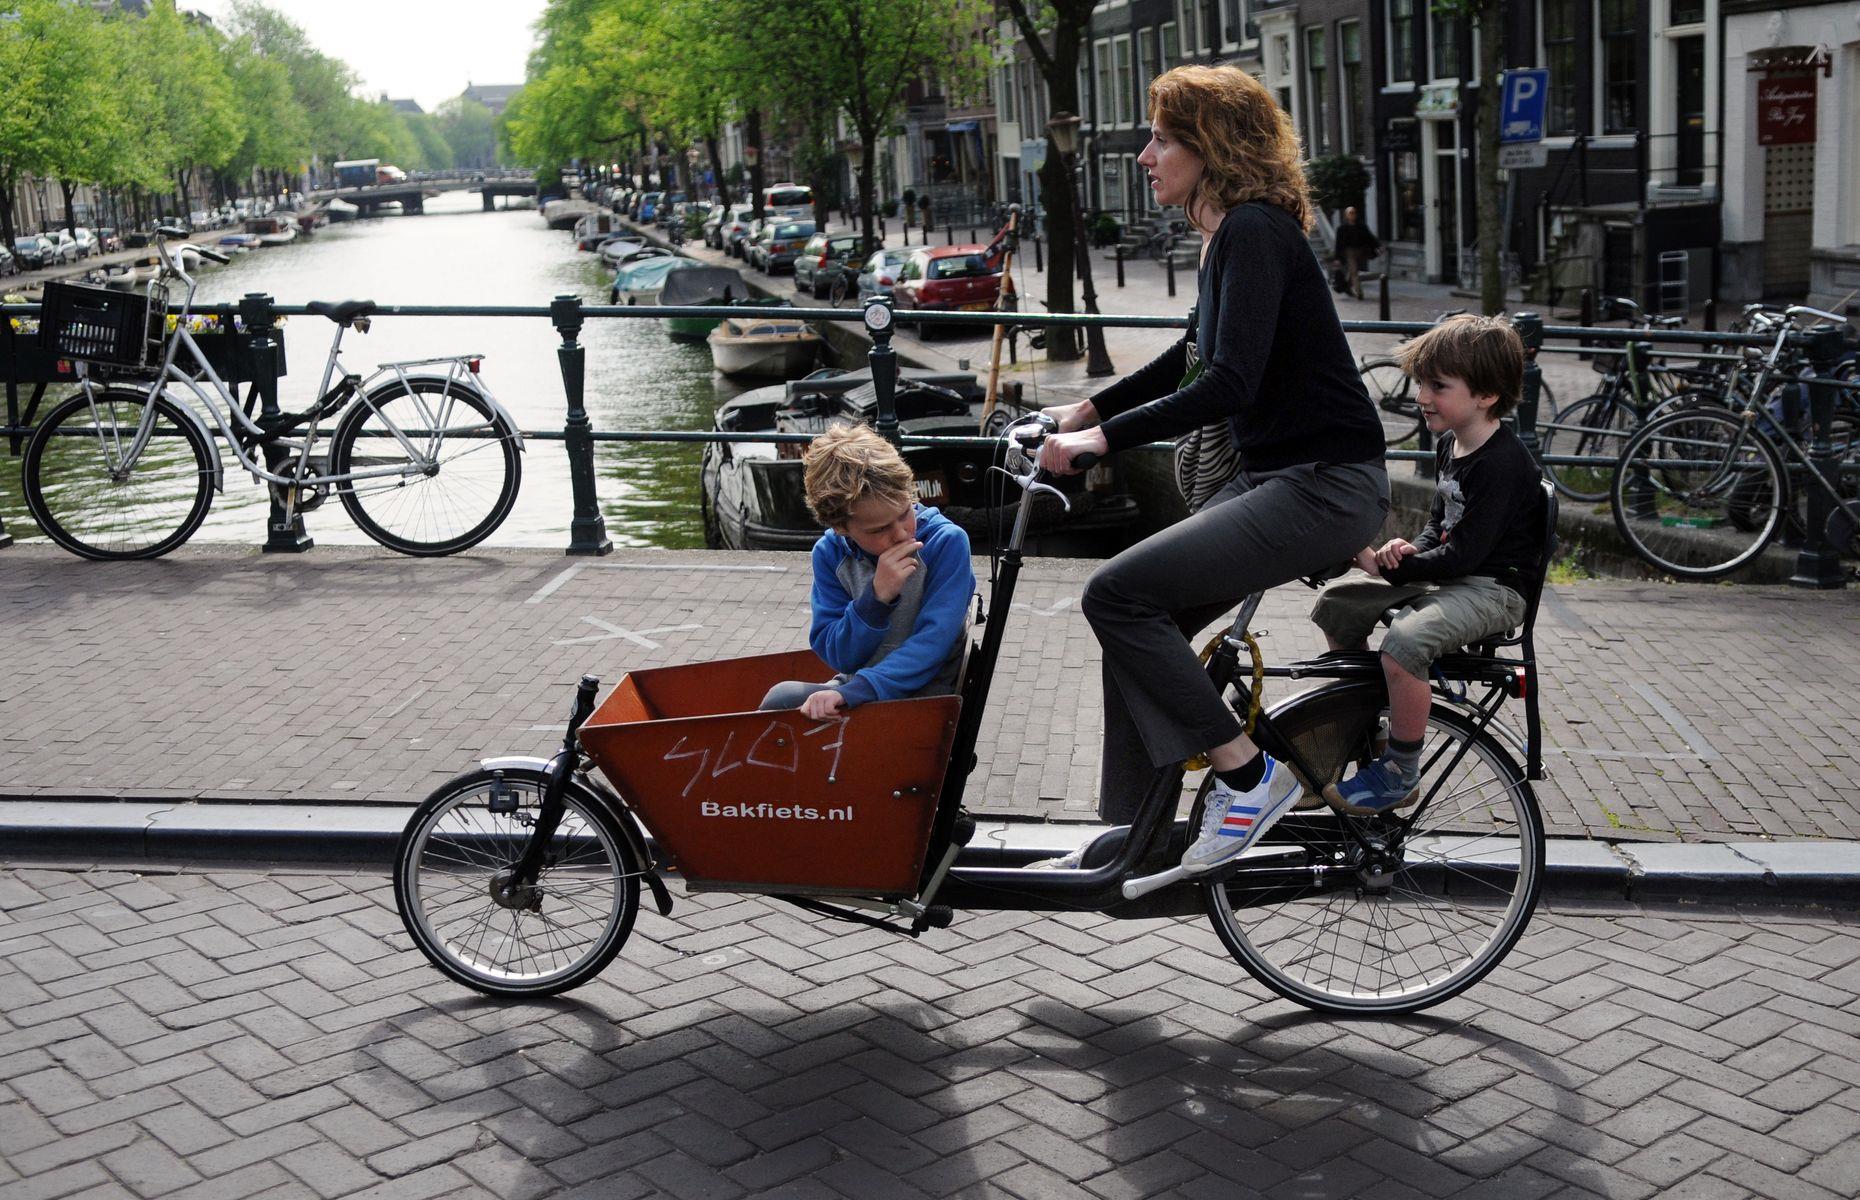 <p>Amsterdam has to be the world’s most bikeable city, and the ability to whizz about on a whim extends to all the family – even little ones who haven’t started cycling. Special <a href="https://www.webikeamsterdam.com/bikes/kids-bike/">family-friendly bike tours</a> and bike rental companies now offer not just the traditional two wheels, but also tandems and cargo bikes, so even if you’re travelling with babies or toddlers, you can drop them safely in the front and explore Amsterdam’s canalside streets, parks and museums by bike.</p>